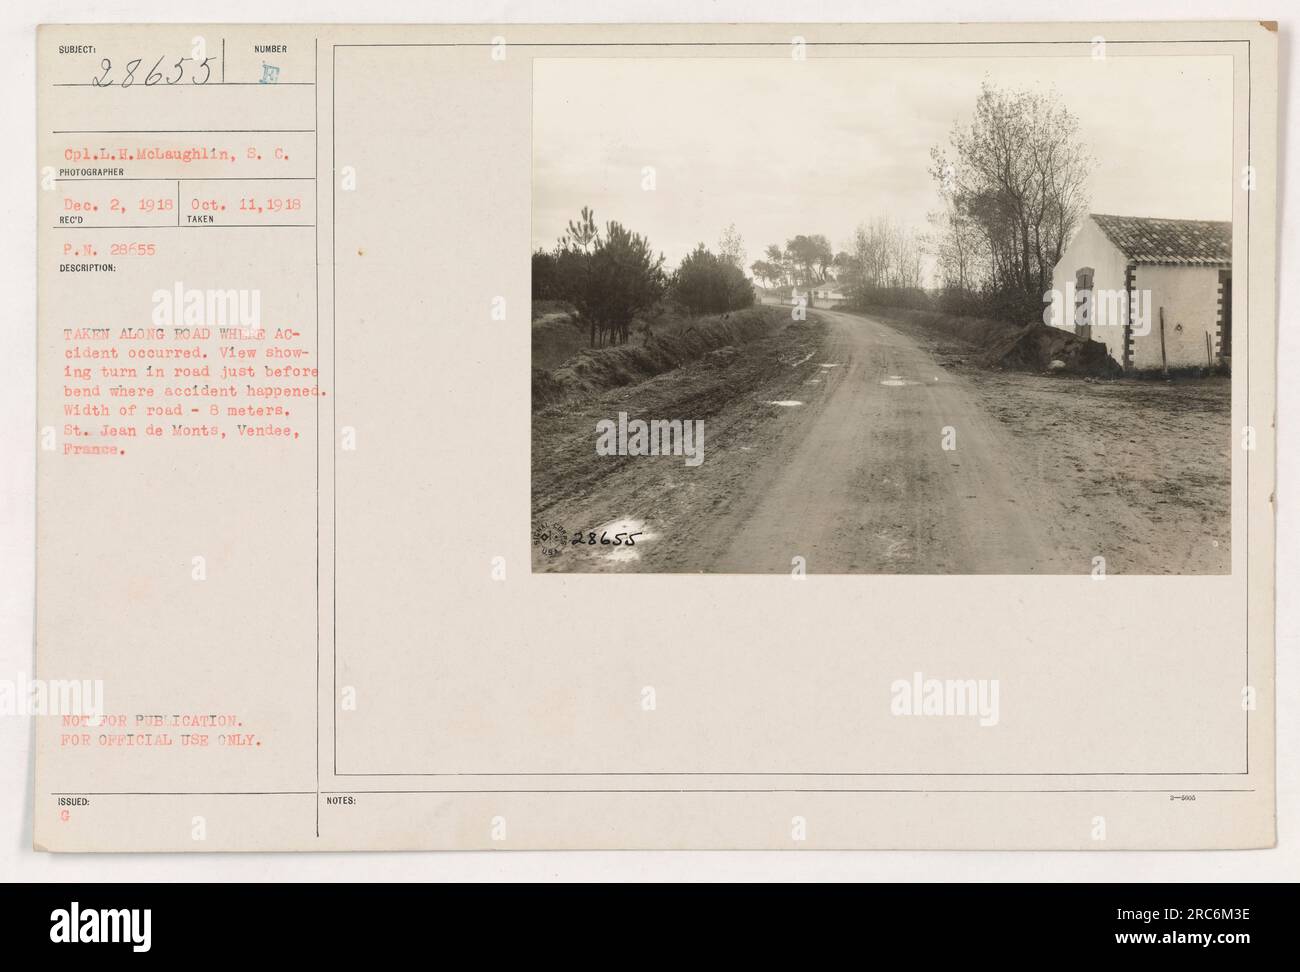 Cpl. L.H. McLaughlin of the S.C. is shown in this photograph taken by SUNDER on Dec. 2, 1918. The image captures a bend in the road where an accident occurred during World War One. The road is approximately 8 meters wide and is located in St. Jean de Monts, Vendee. The photograph is marked not for publication and is intended for official use only. Stock Photo